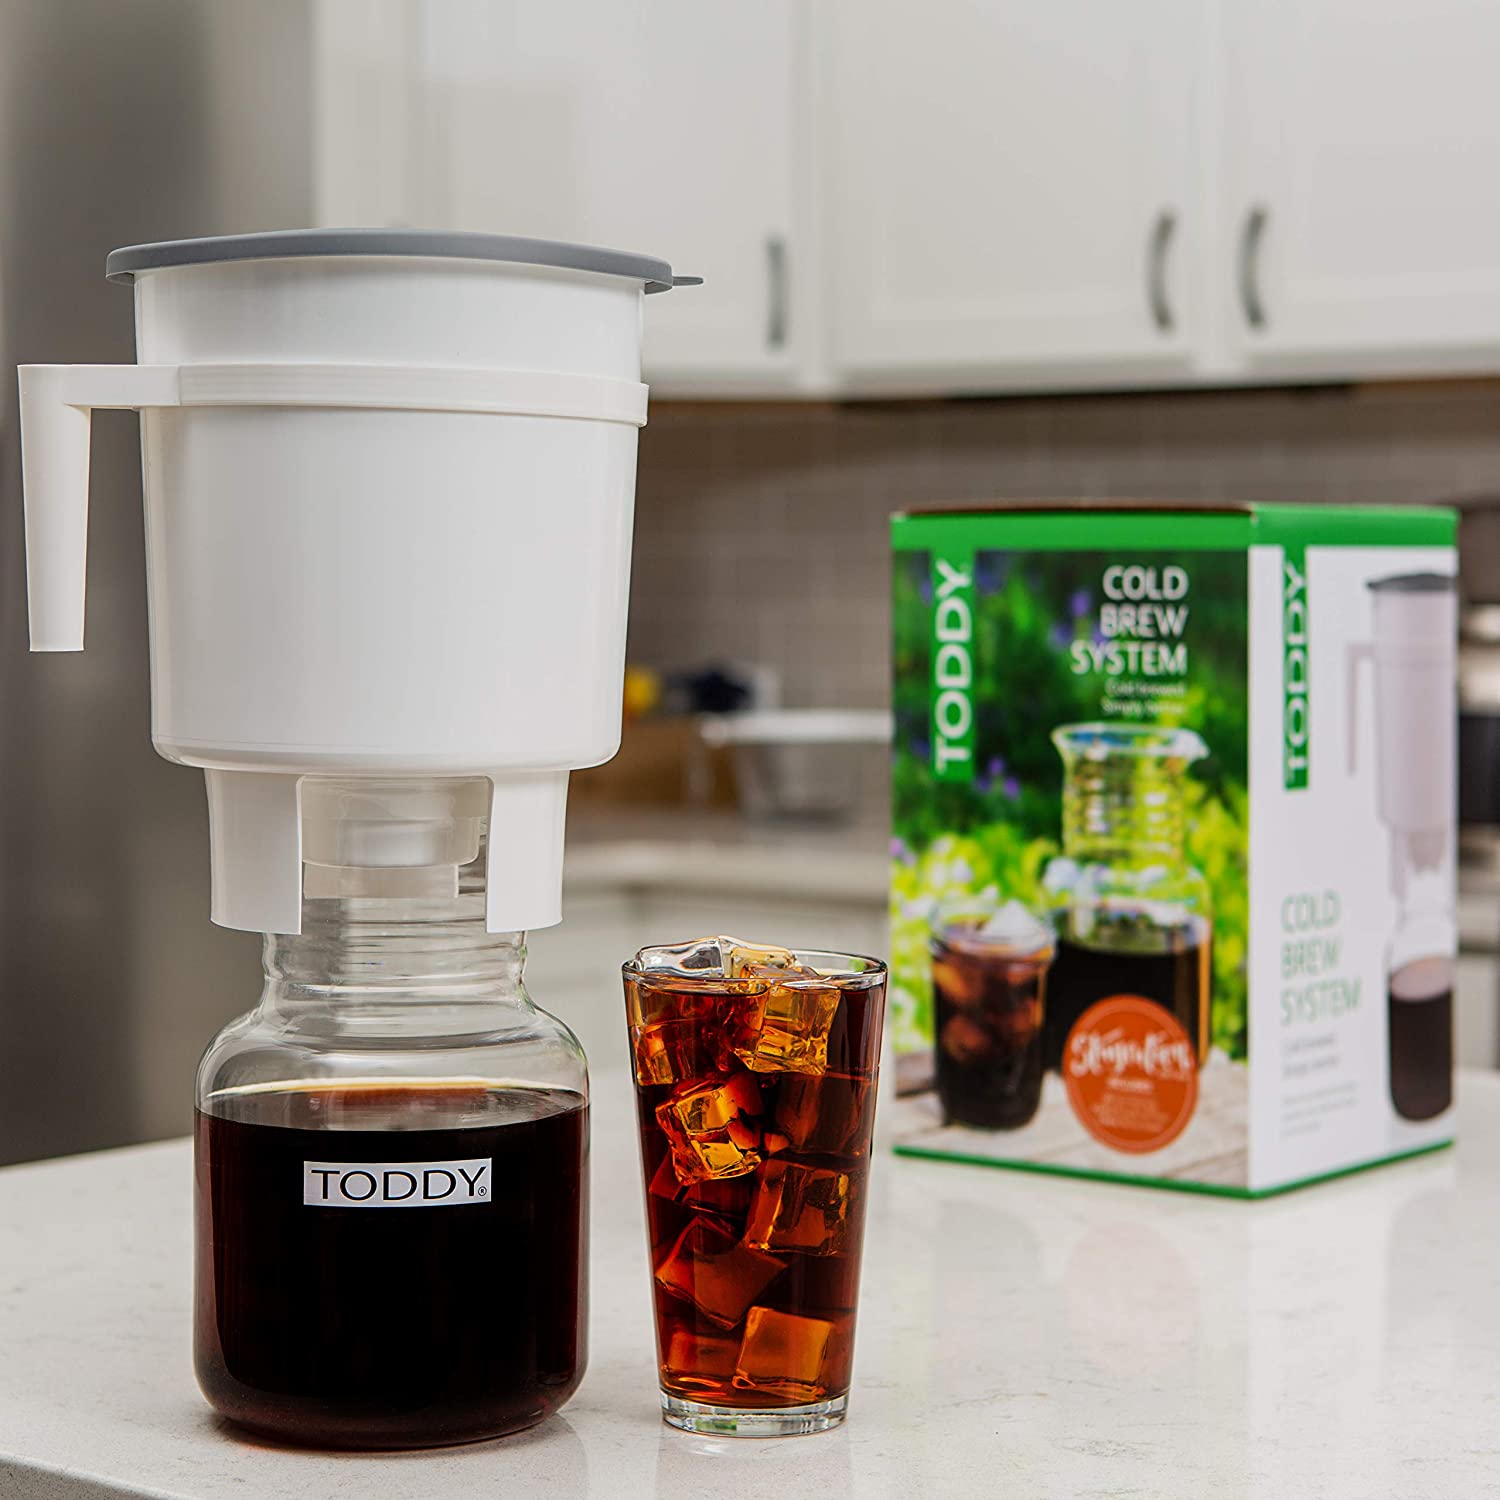 Toddy Cold Brew Coffee System - illy Shop